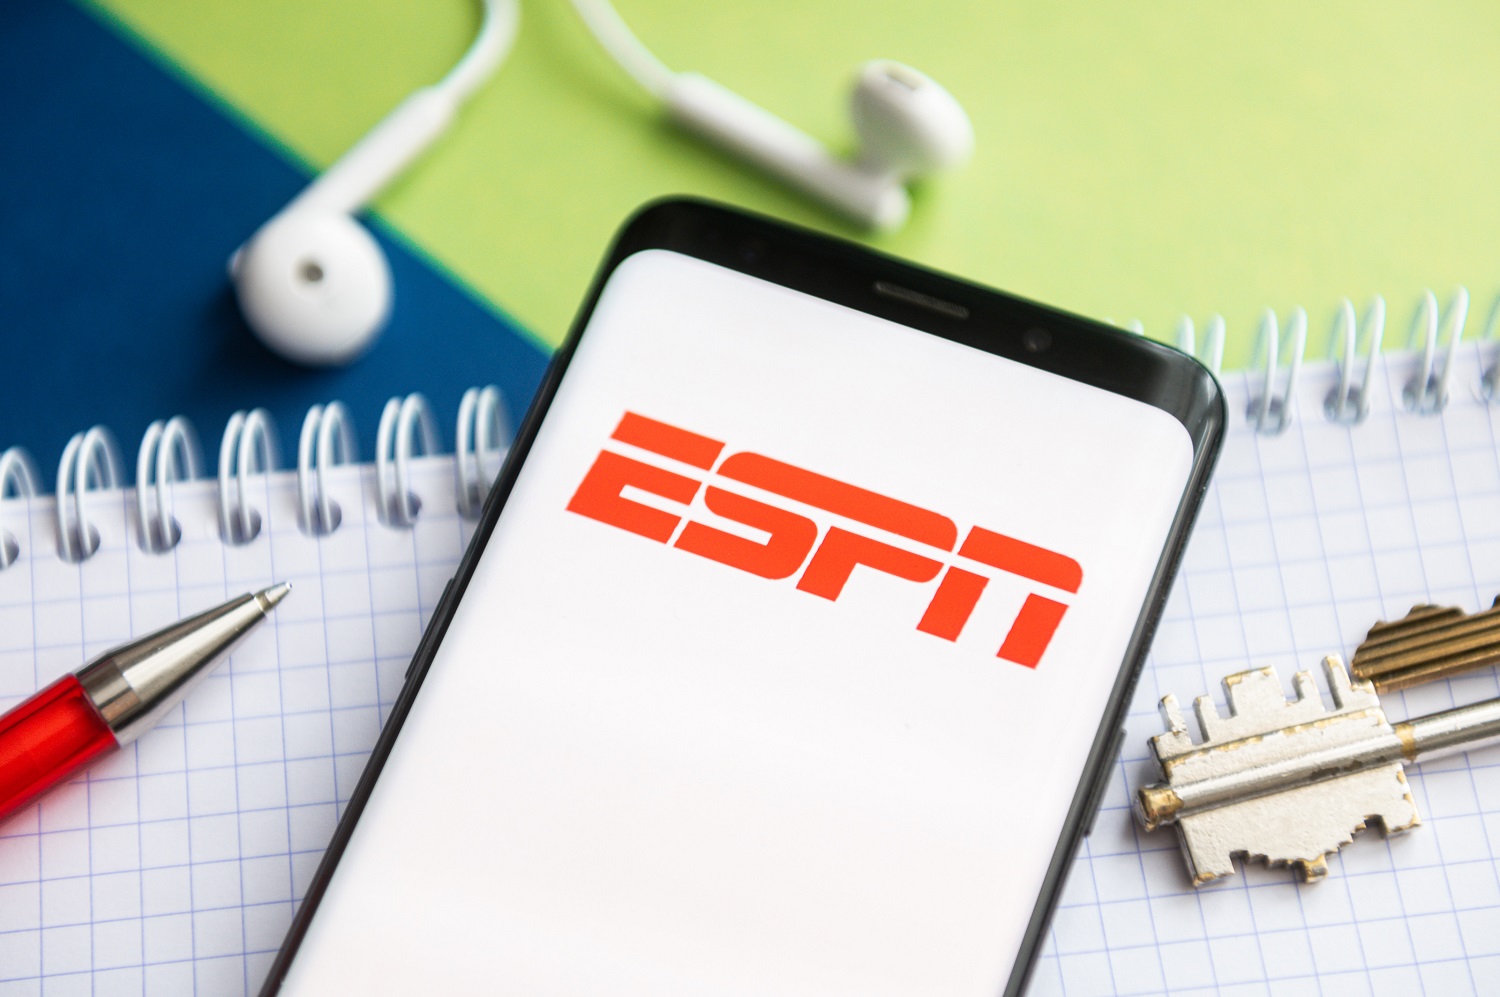 In this photo illustration, a ESPN logo seen displayed on a smartphone with a pen, key, book and headsets in the background.